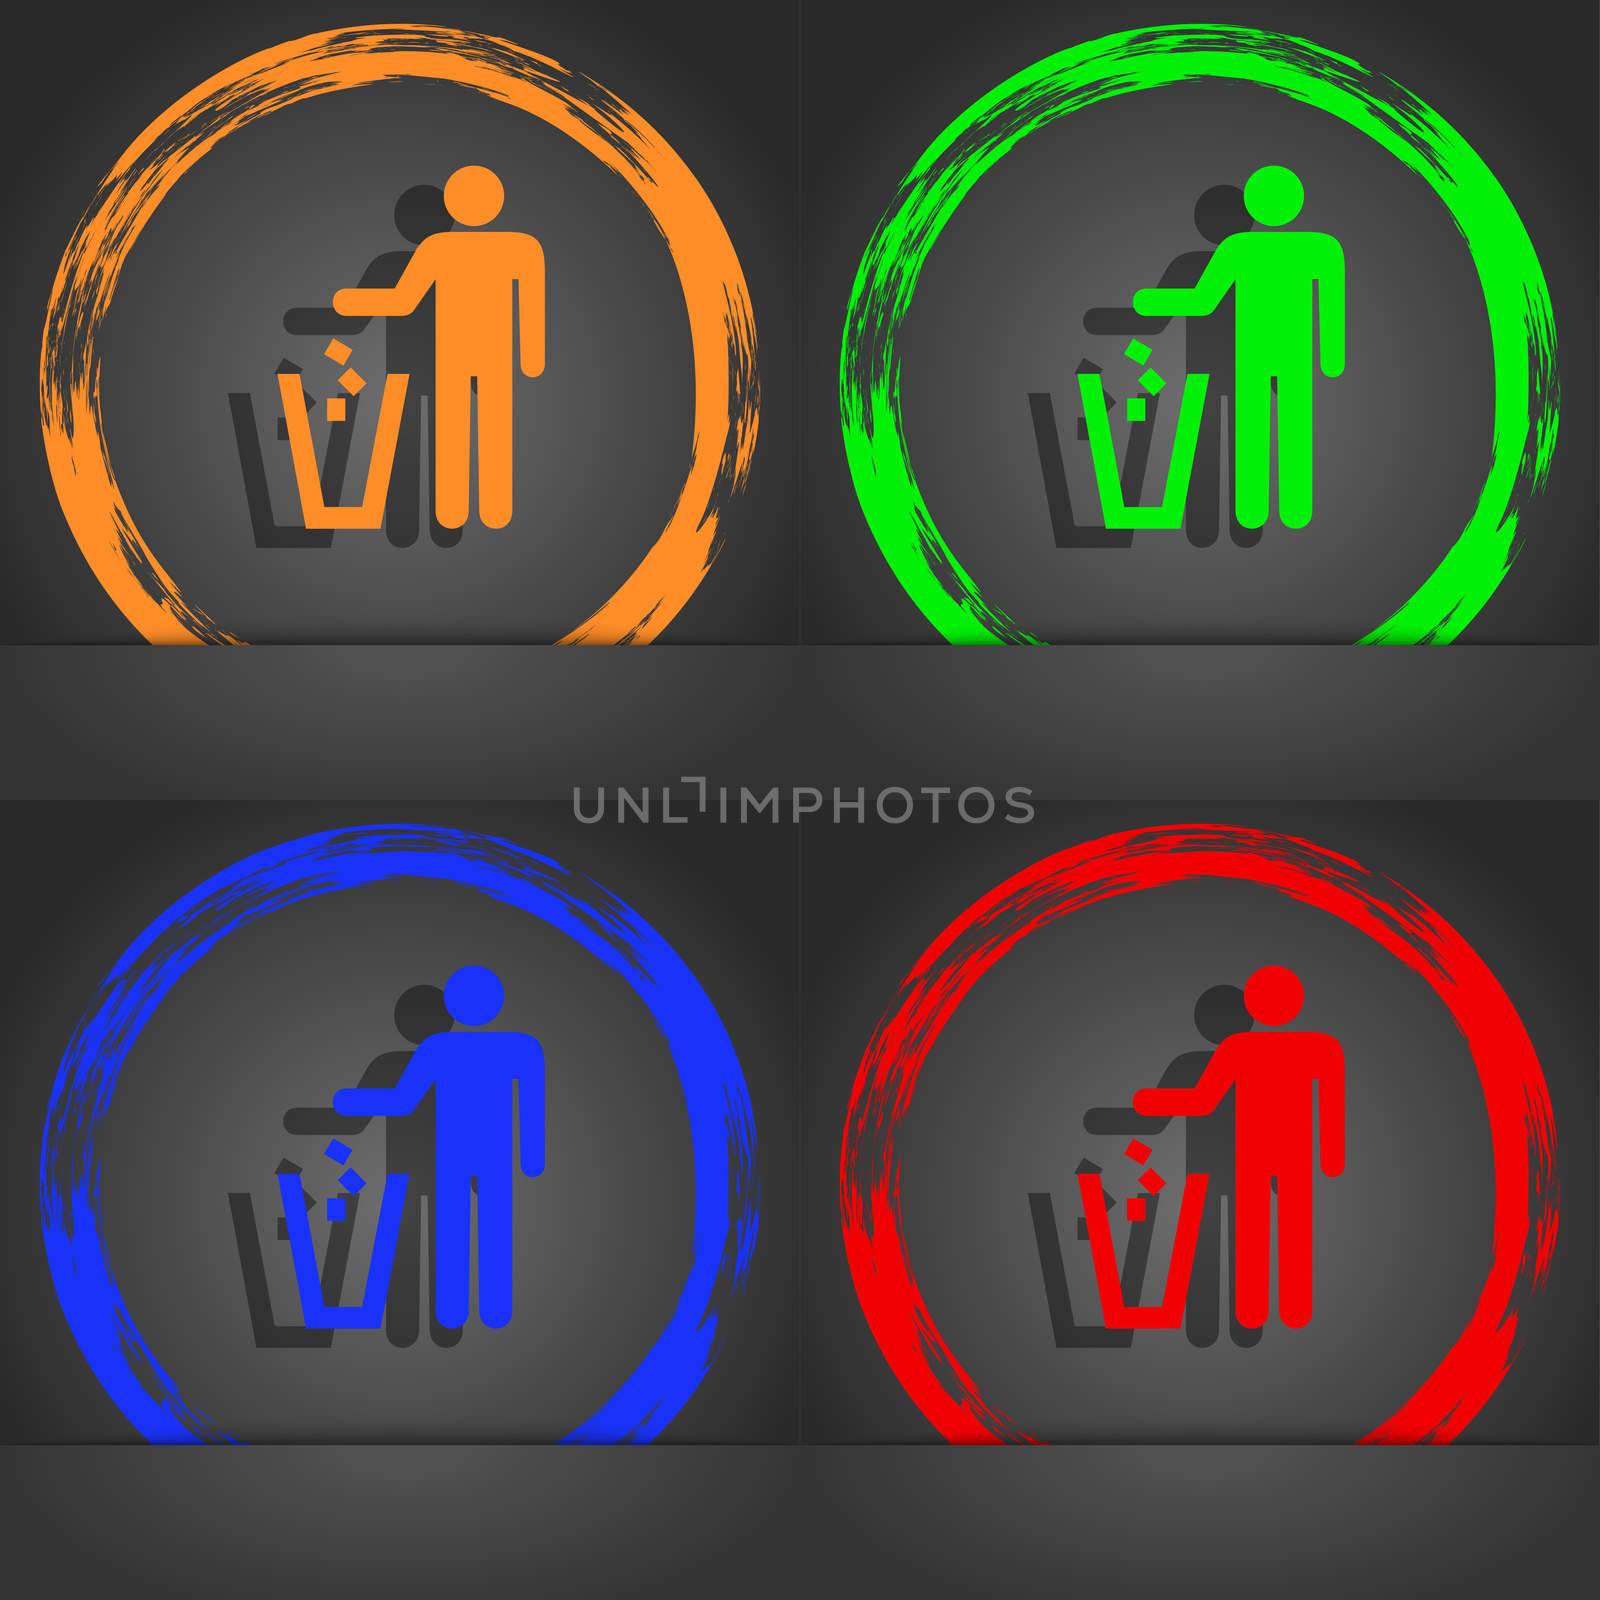 throw away the trash icon symbol. Fashionable modern style. In the orange, green, blue, green design.  by serhii_lohvyniuk